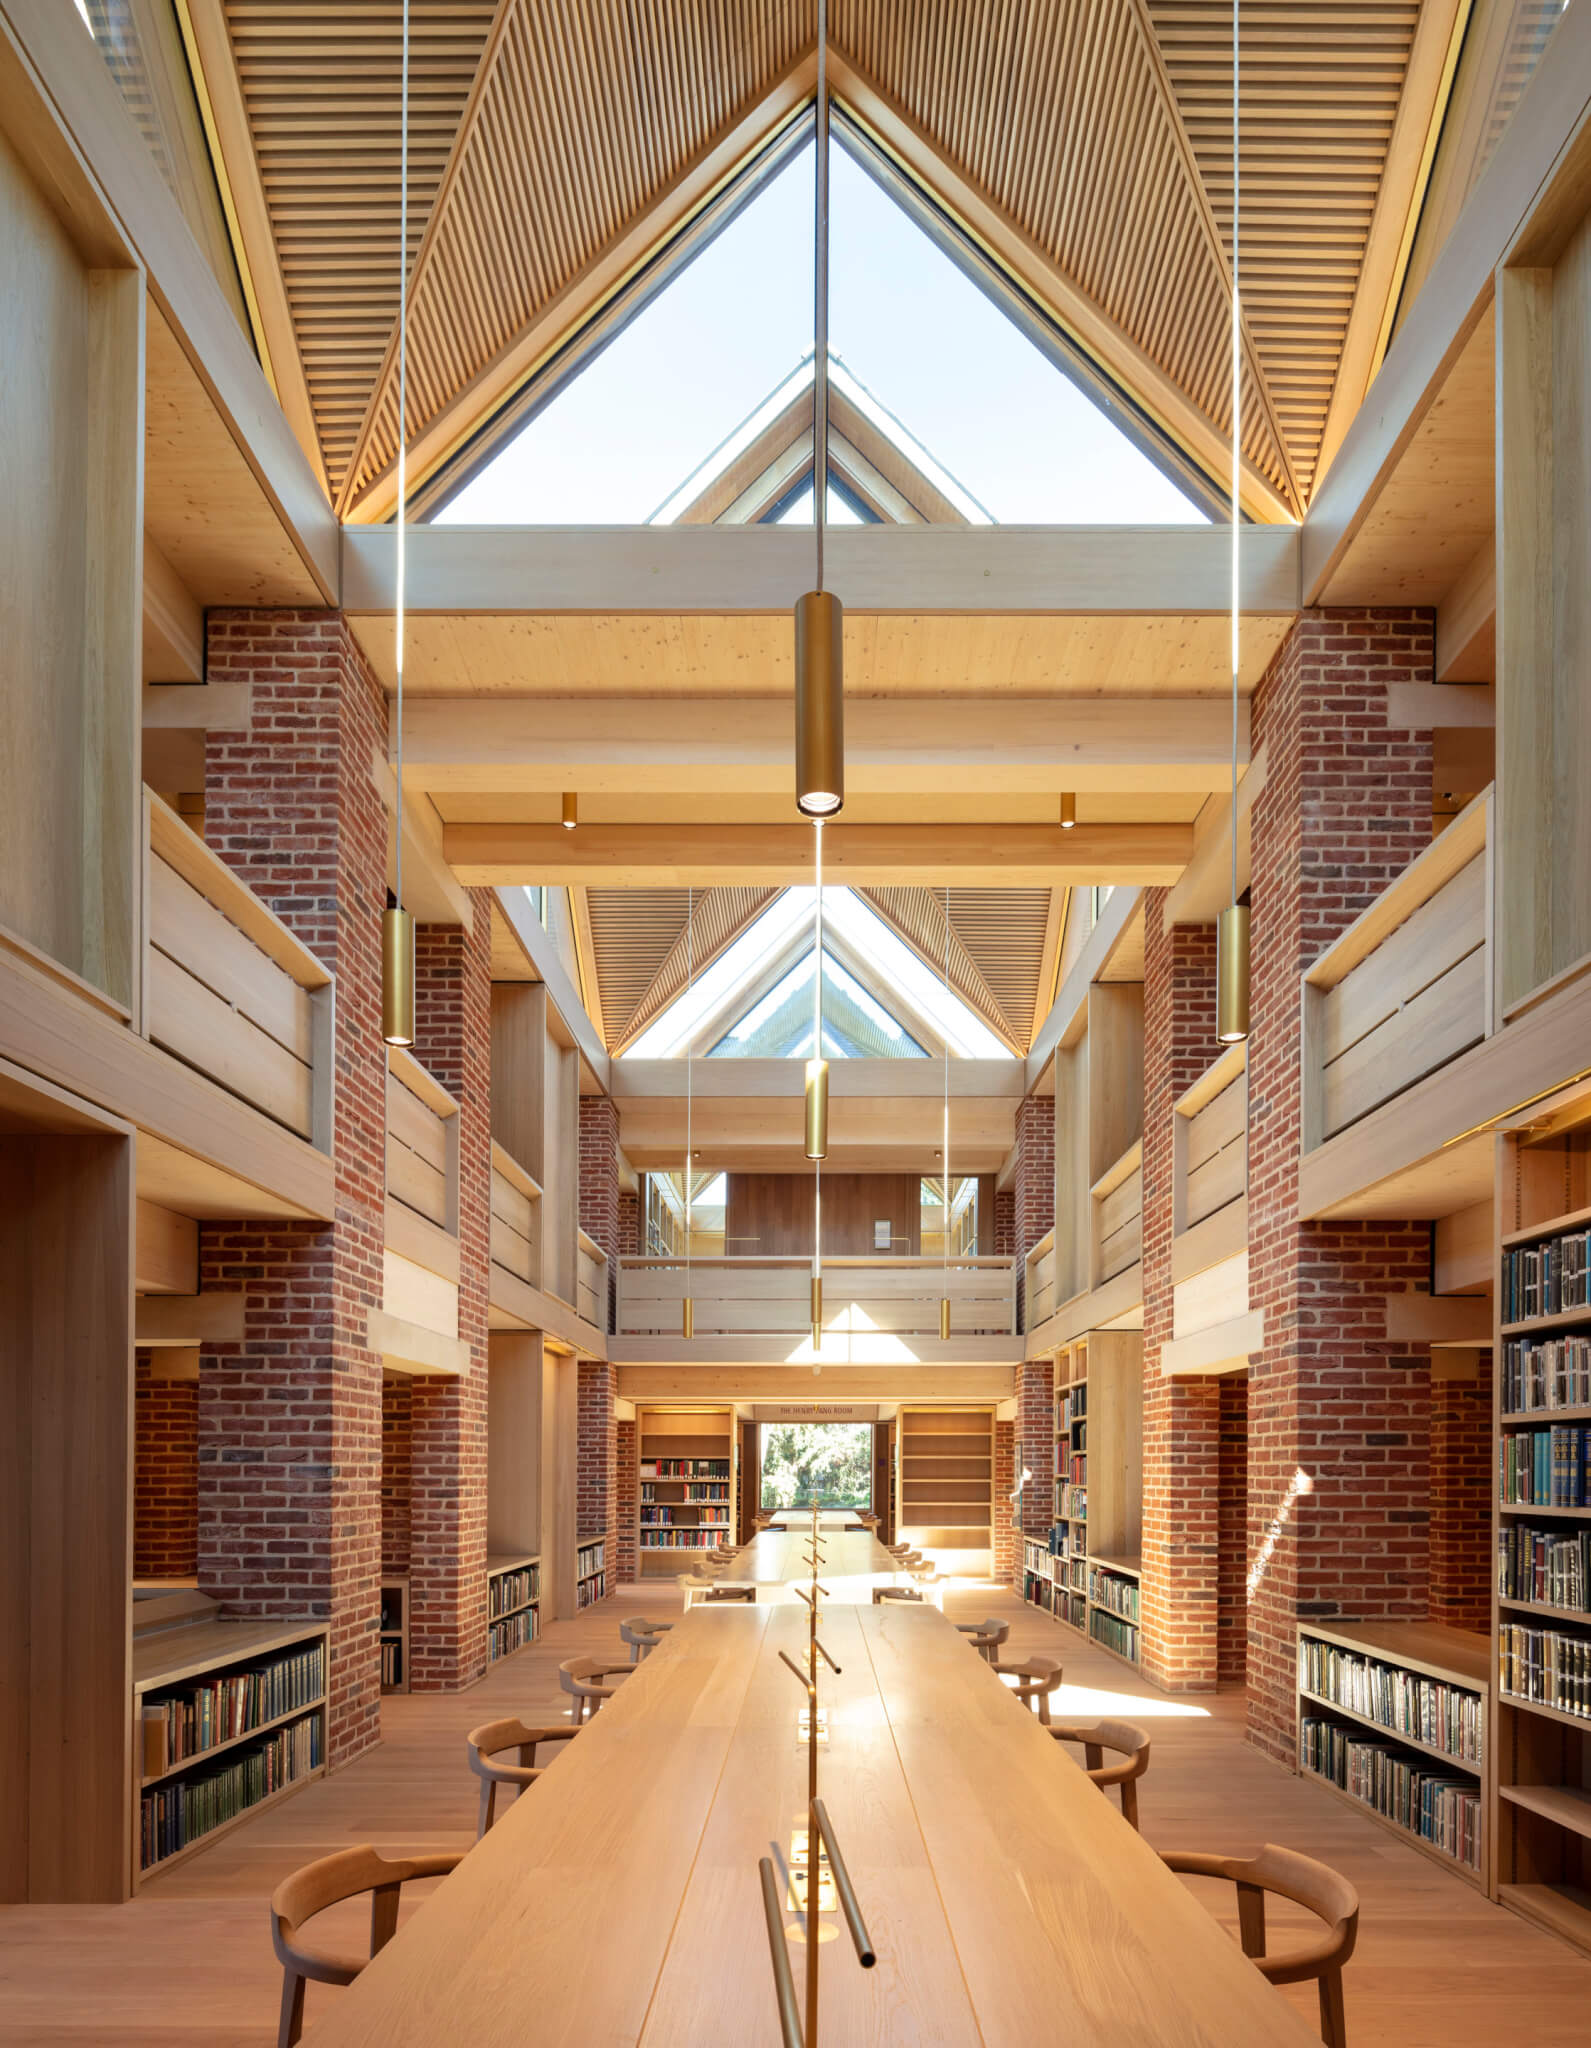 looking down a long library study hall with timber and large windows